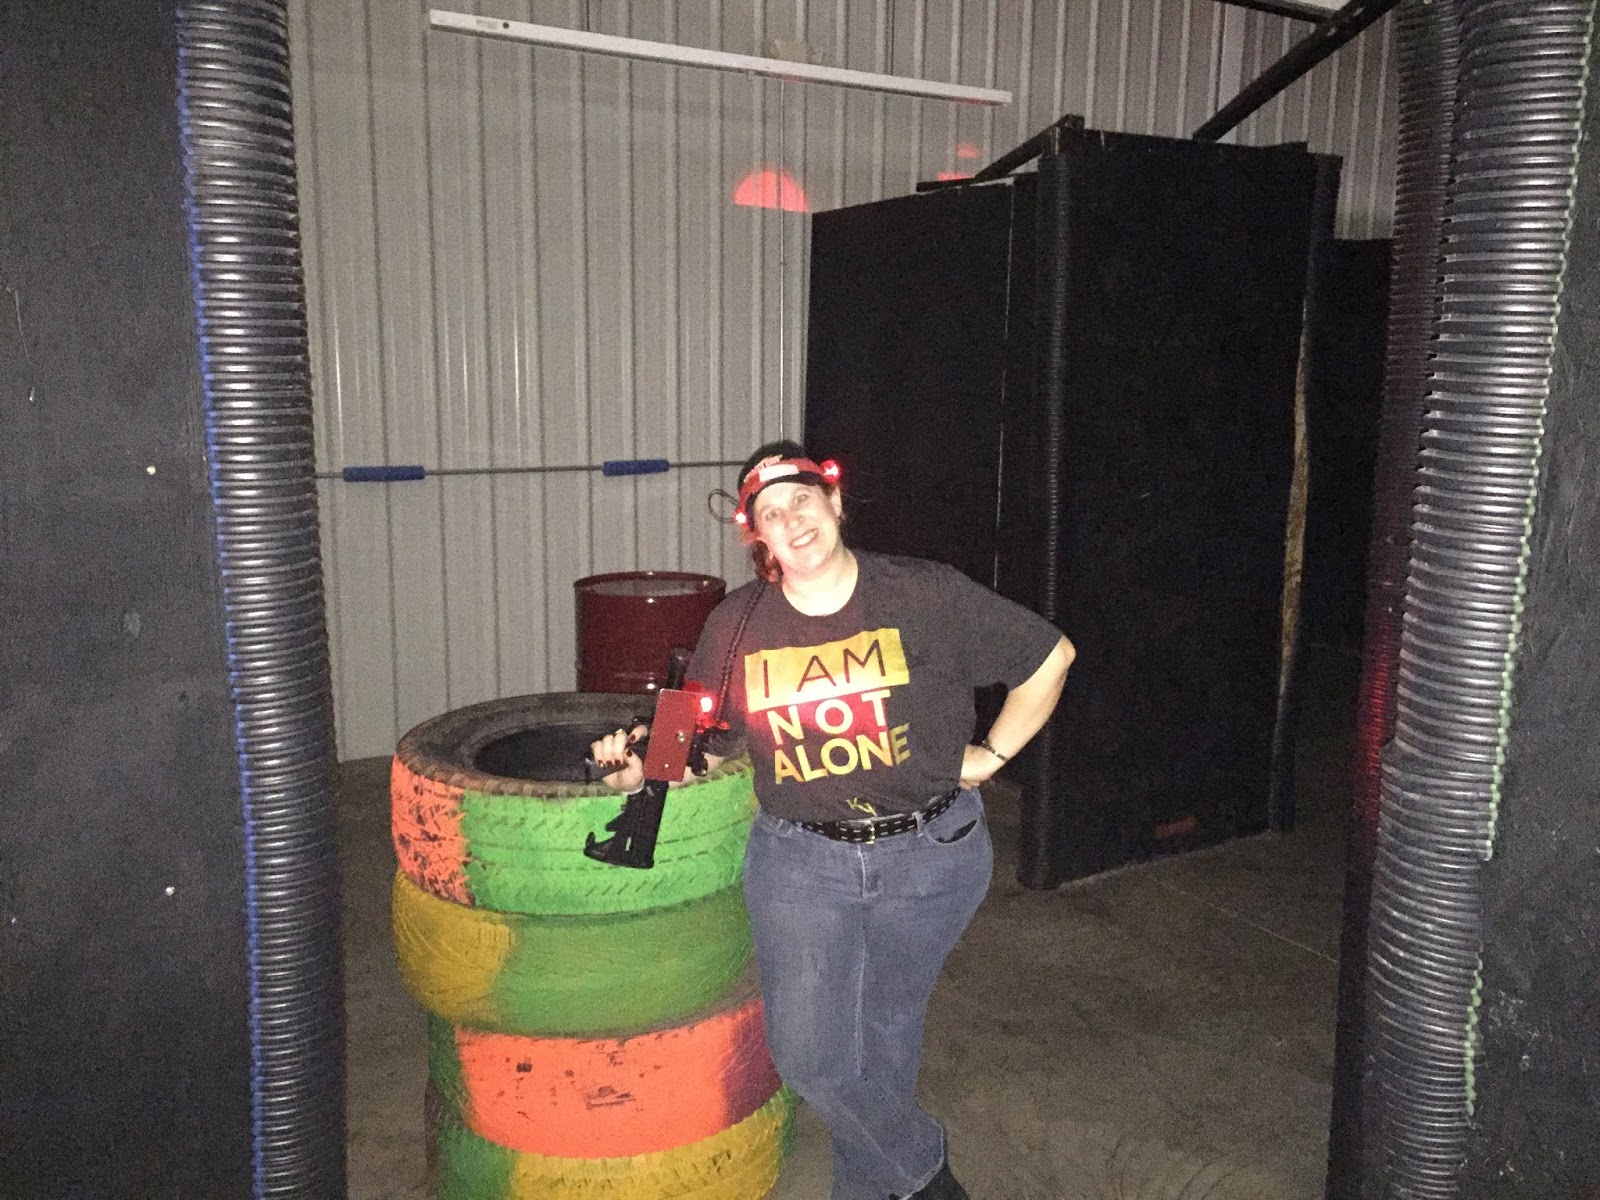 Ilion laser tag enthusiast aims for new record